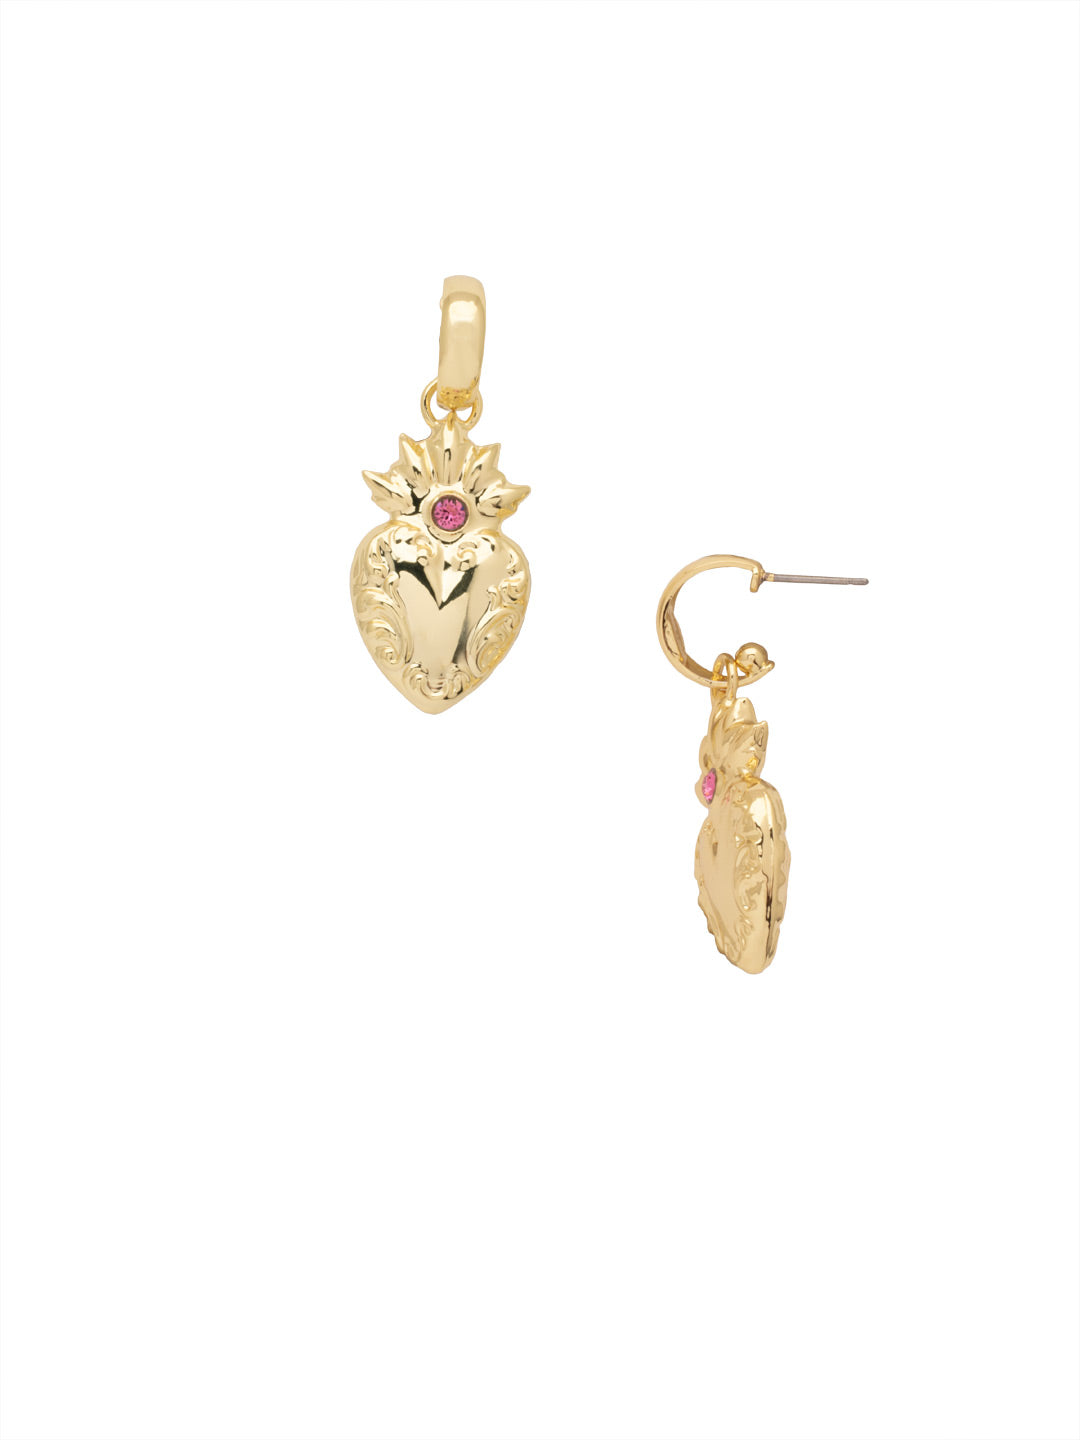 Twin Flame Statement Earrings - EFE2BGFSK - <p>The Twin Flame Statement Earrings feature a chunky metal heart charm with a flame detail and a single crystal embellishment. From Sorrelli's First Kiss collection in our Bright Gold-tone finish.</p>